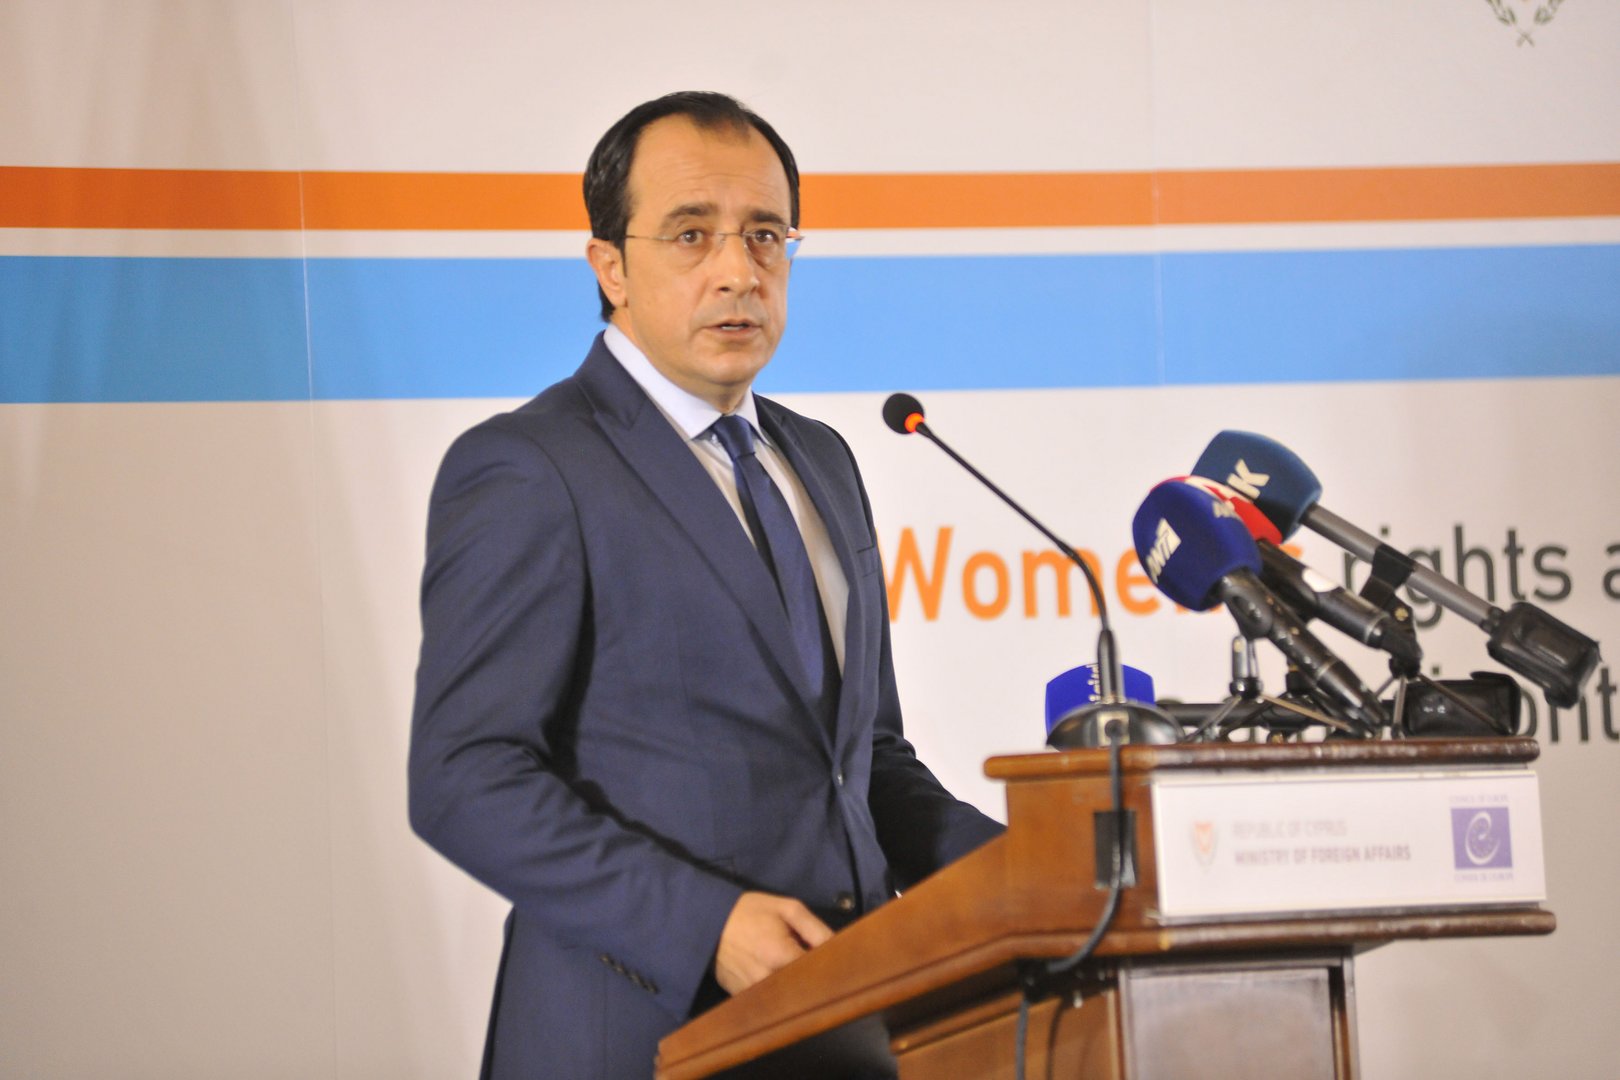 image Former aide accuses Christodoulides of underhanded campaign tactics